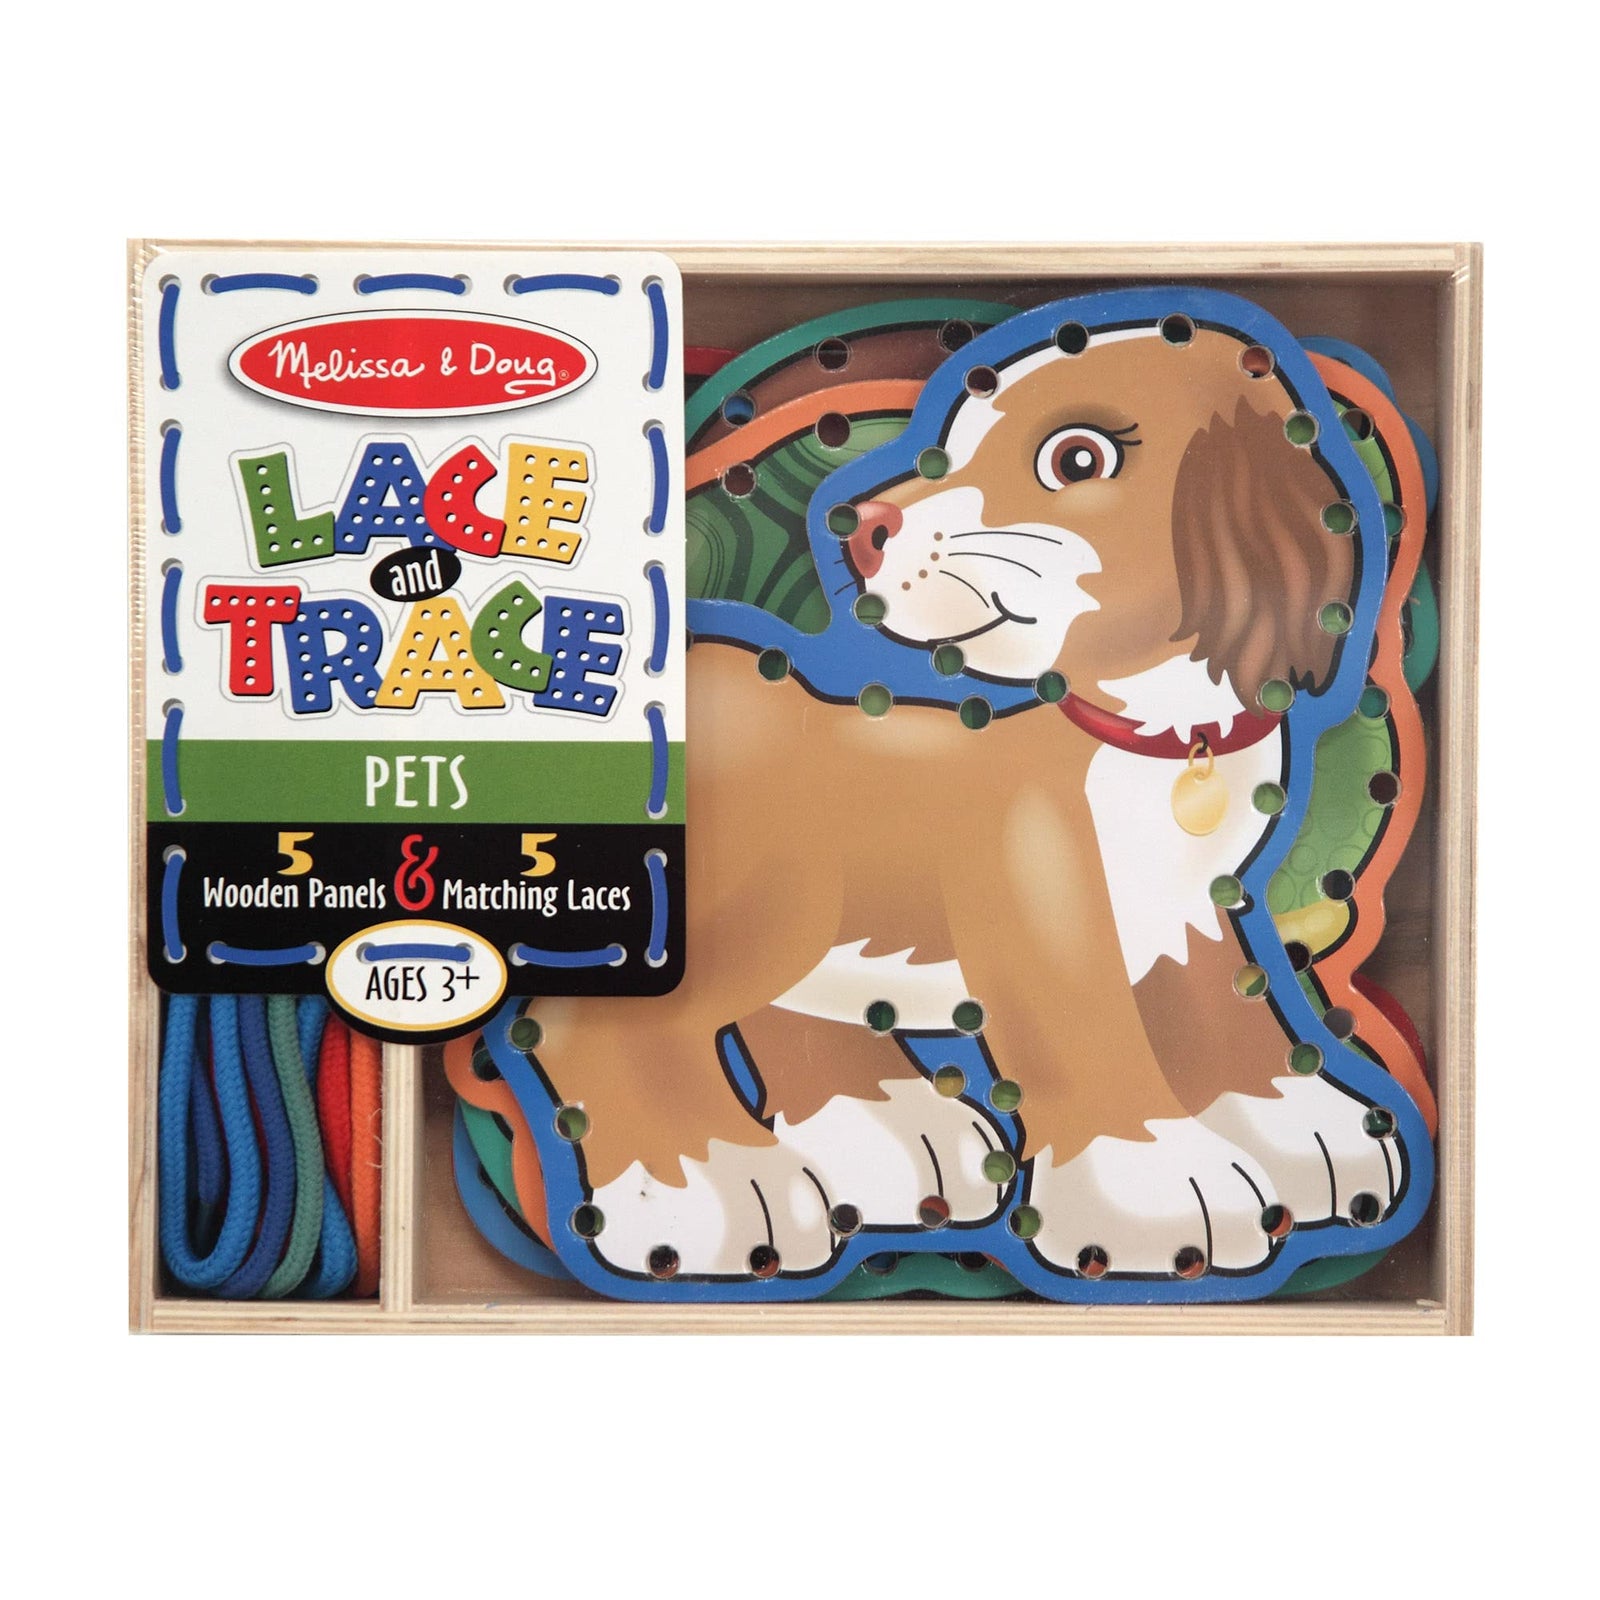 Melissa & Doug Lace and Trace Activity Set: Pets - 5 Wooden Panels and 5 Matching Laces